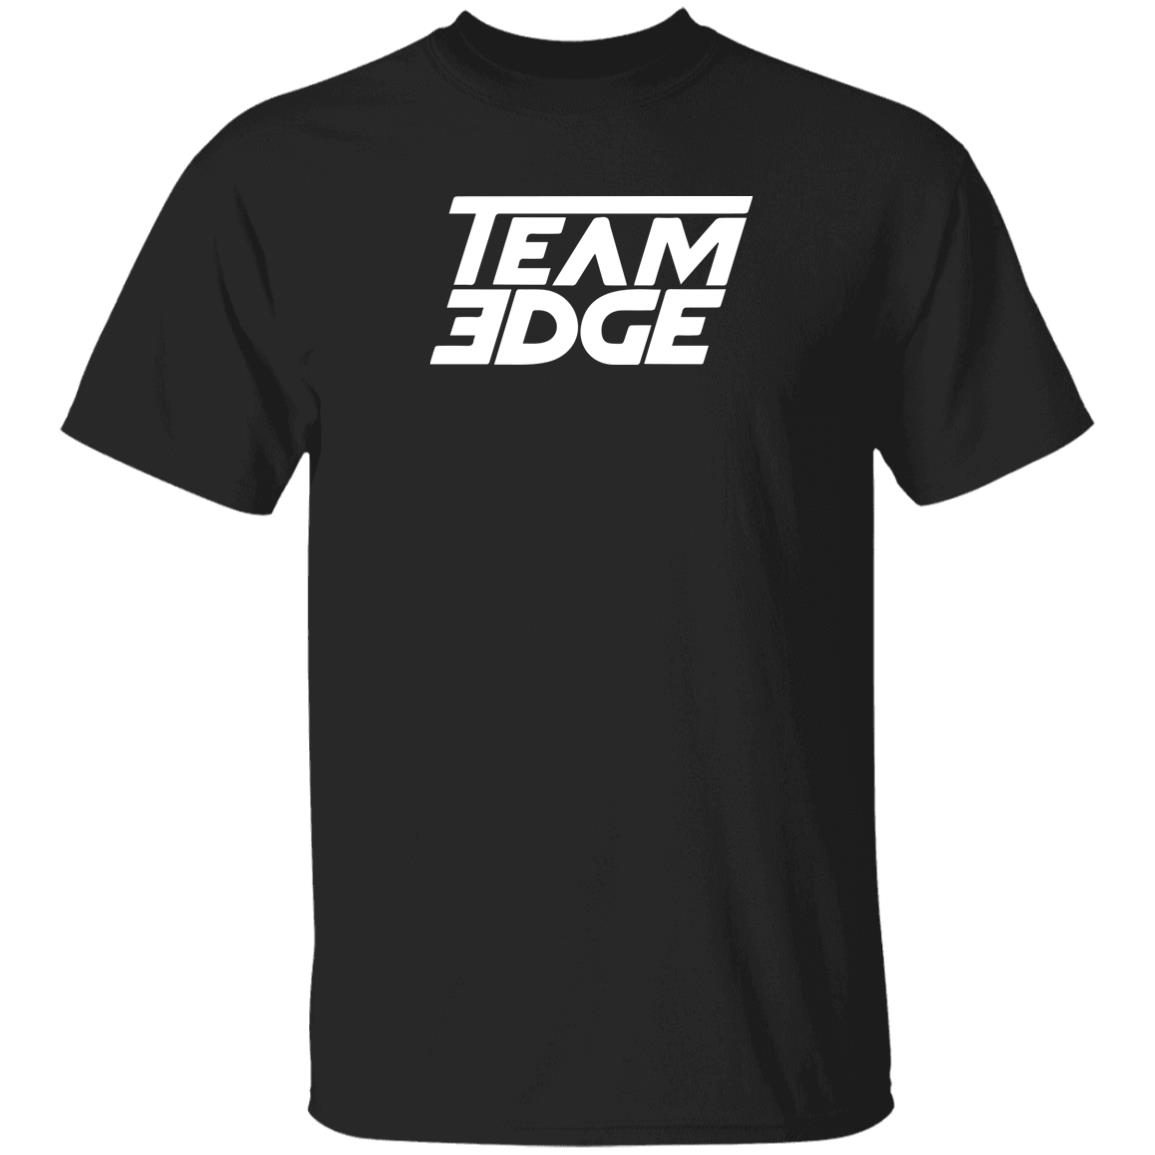 Team Edge Merch Classic Logo Tee
#TeamEdge #Merchandise #ClassicLogo #Tee #Apparel #Clothing #Fashion #AmericanStyle #PopularBrand #FanFavorites #OnlineShopping #LimitedEdition

tipatee.com/product/team-e…